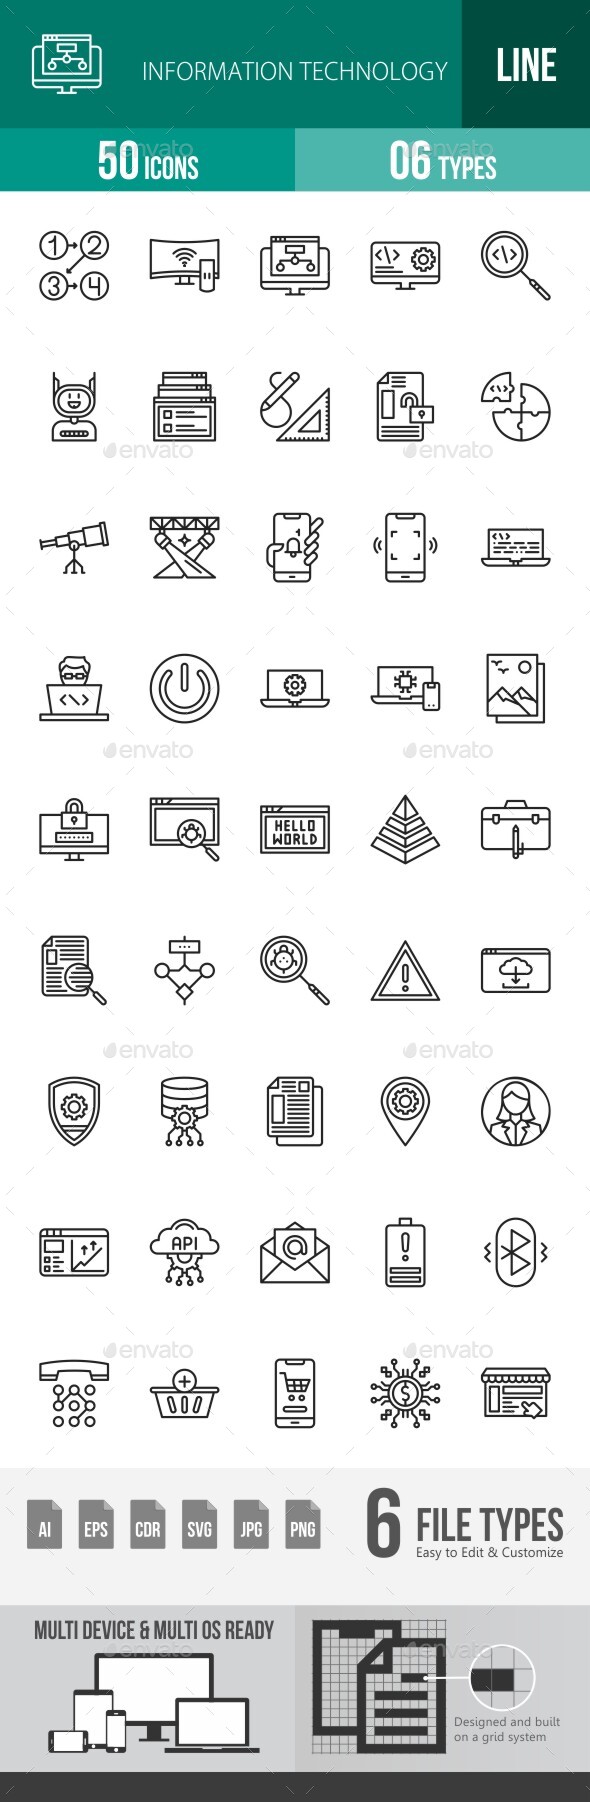 [DOWNLOAD]Information Technology Line Icons